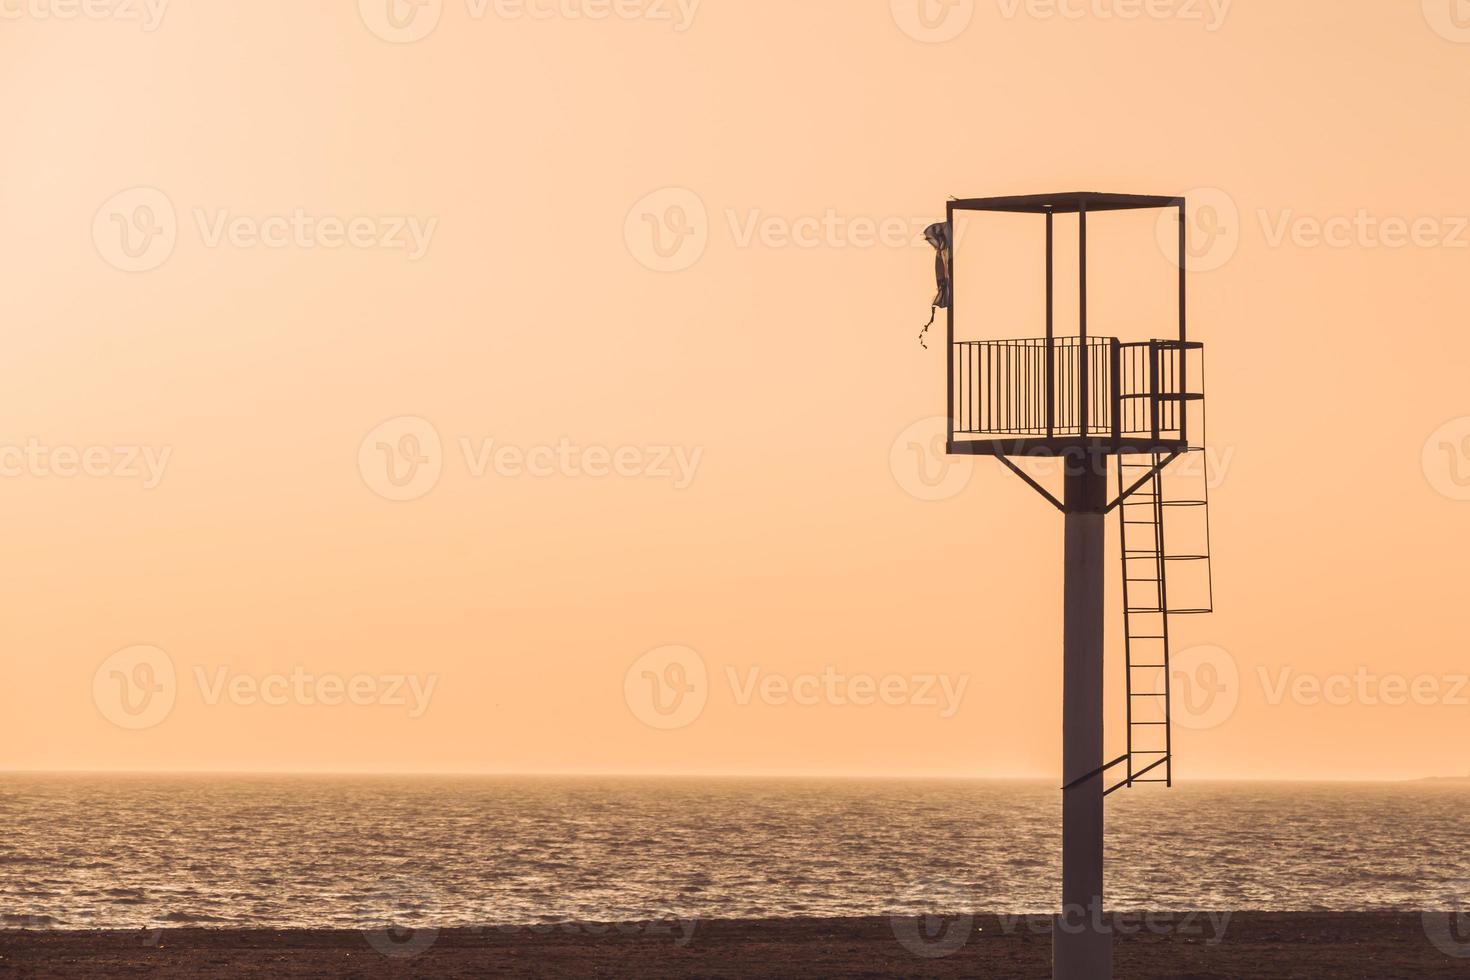 Almerimar beach lifeguard tower at sunset. Deserted beach, no people. Almeria, Andalusia, Spain photo